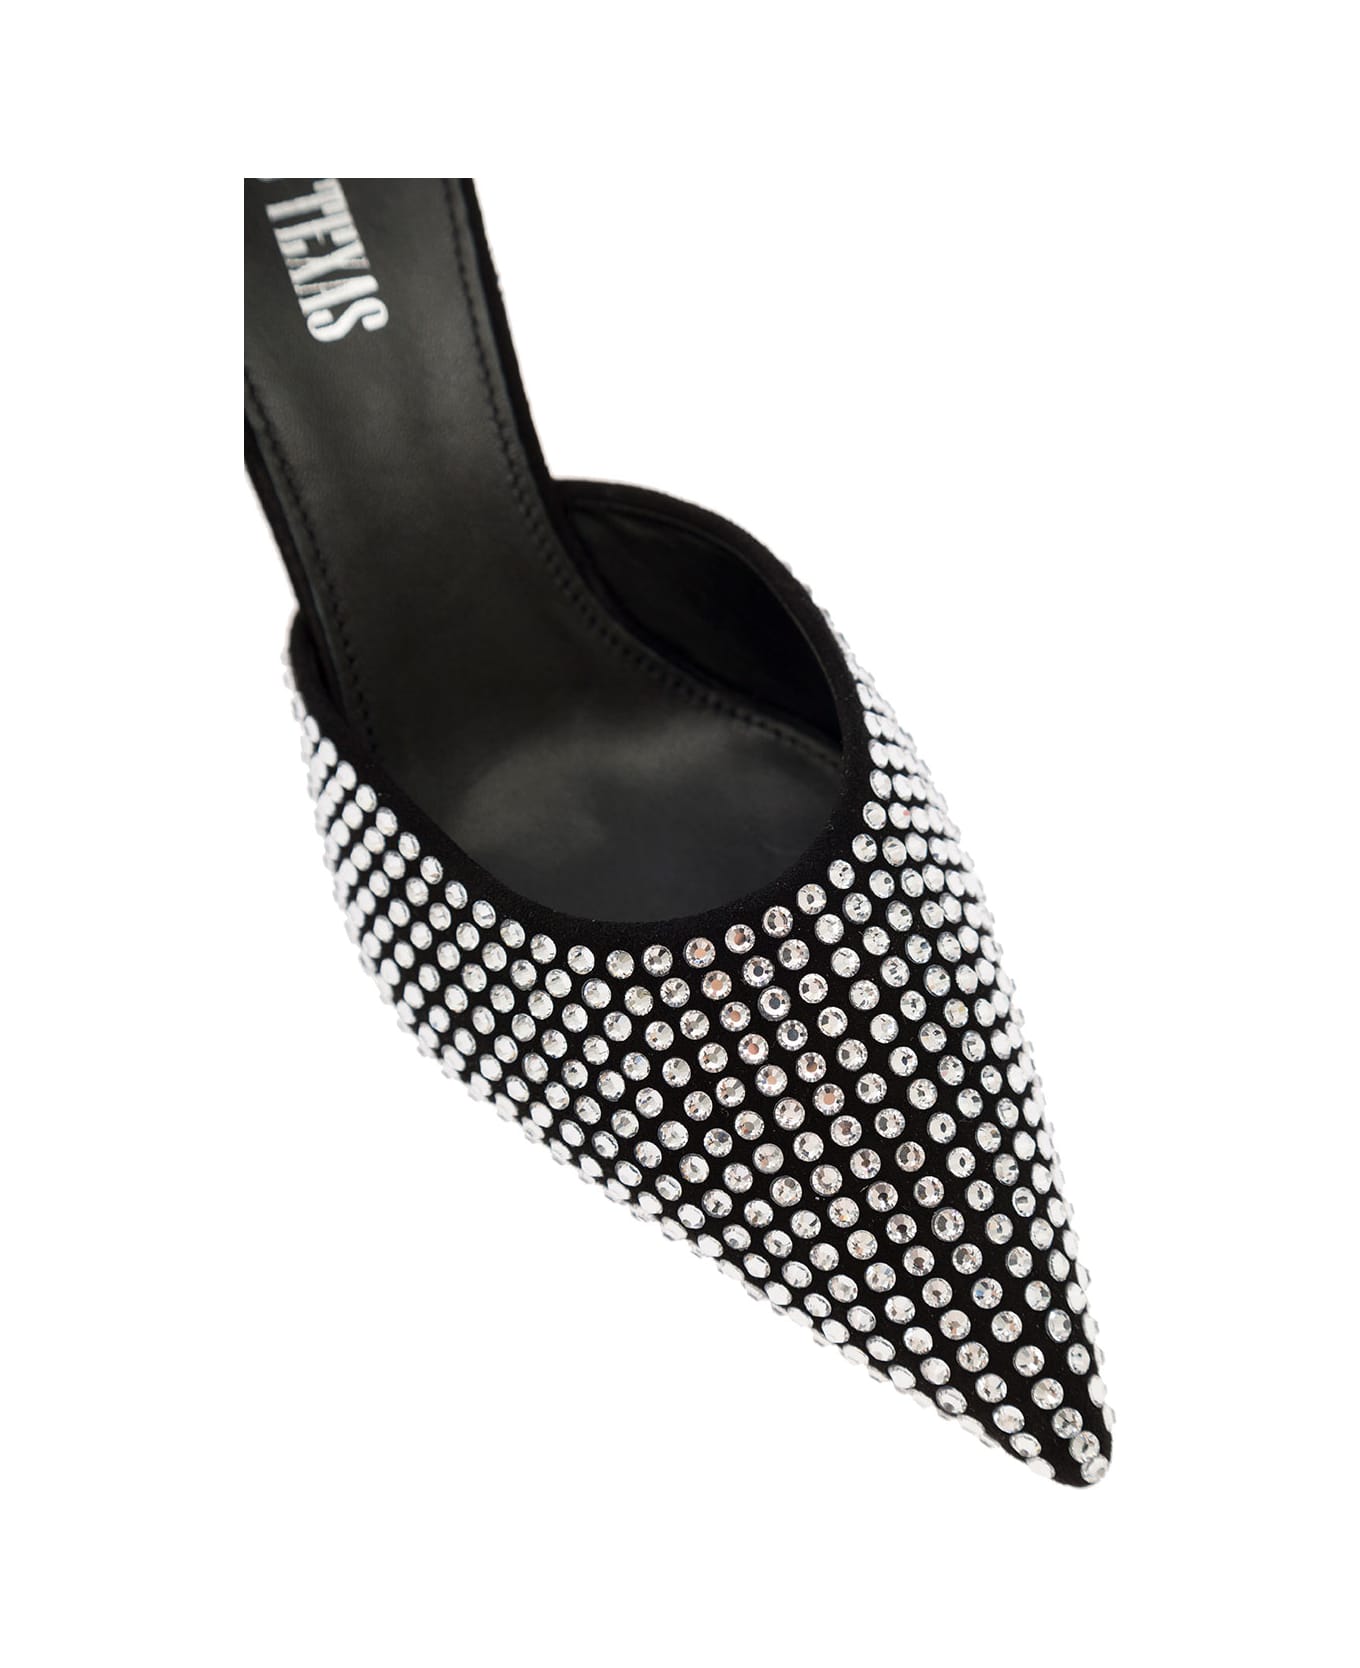 Paris Texas 'hollywood' Black Pointed Mules With Rhinestone Embellishment In Leather Woman - Black サンダル